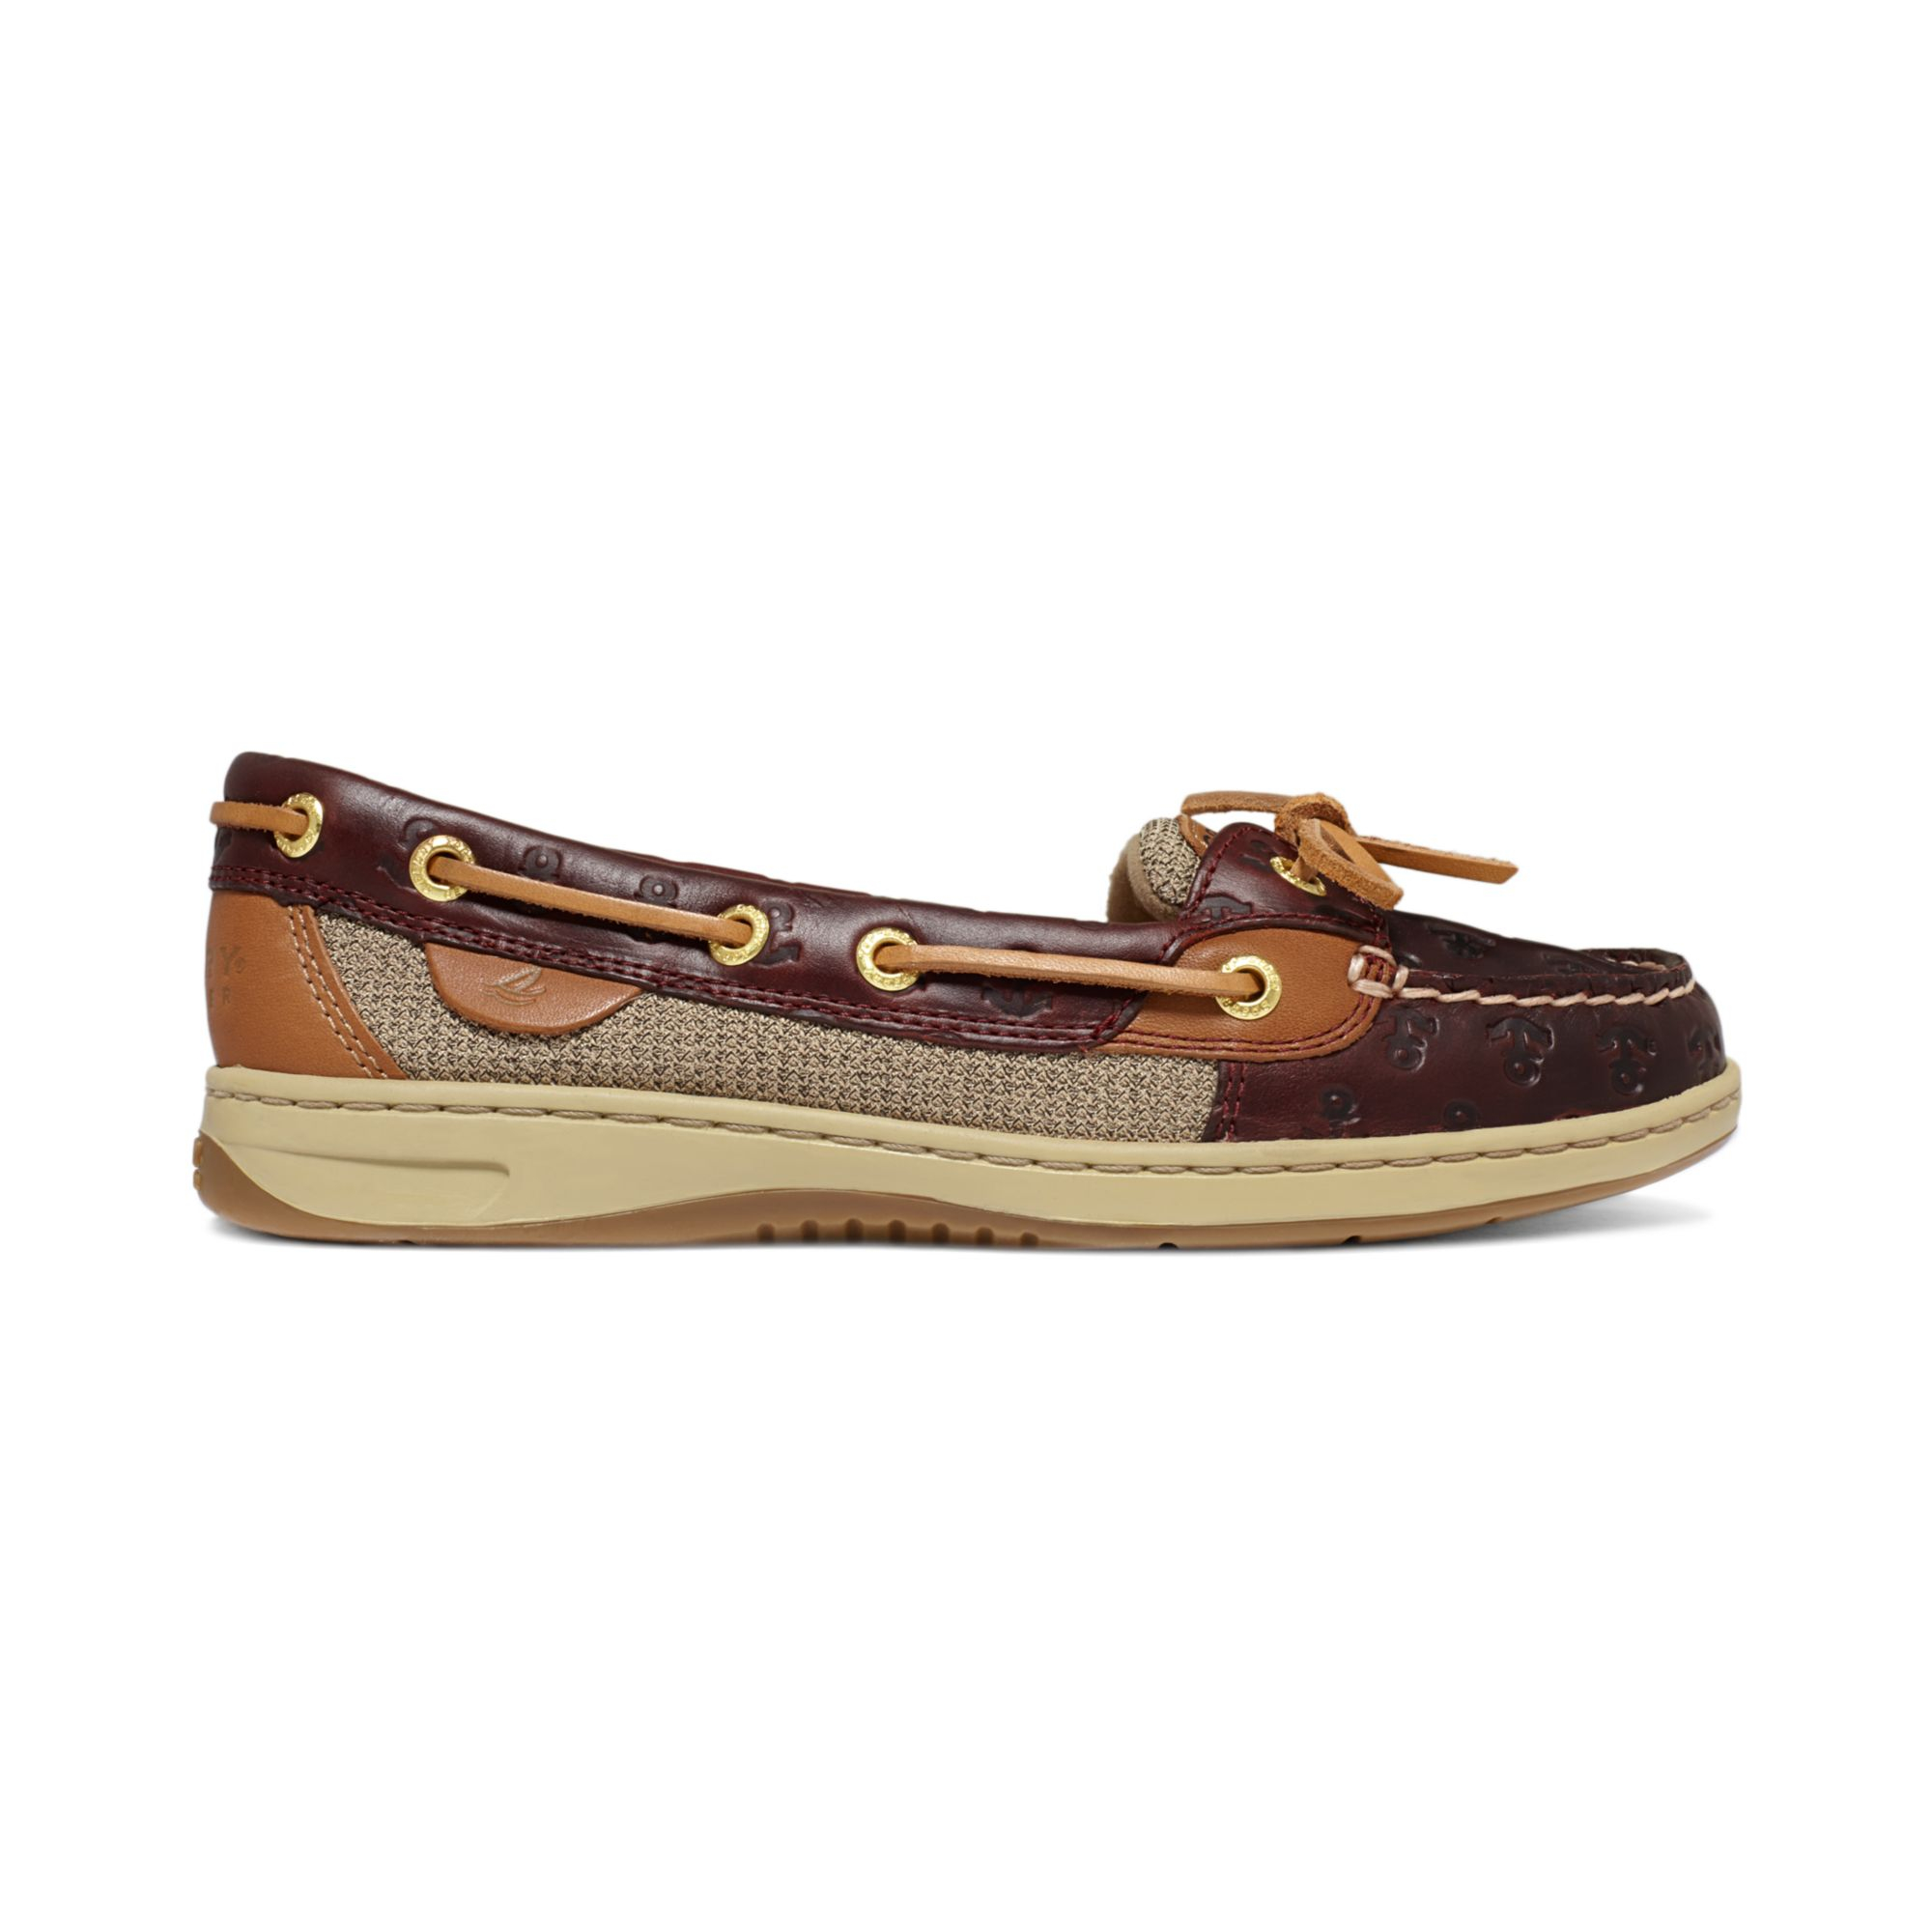 Sperry Top-Sider Angelfish Boat Shoes in Brown - Lyst